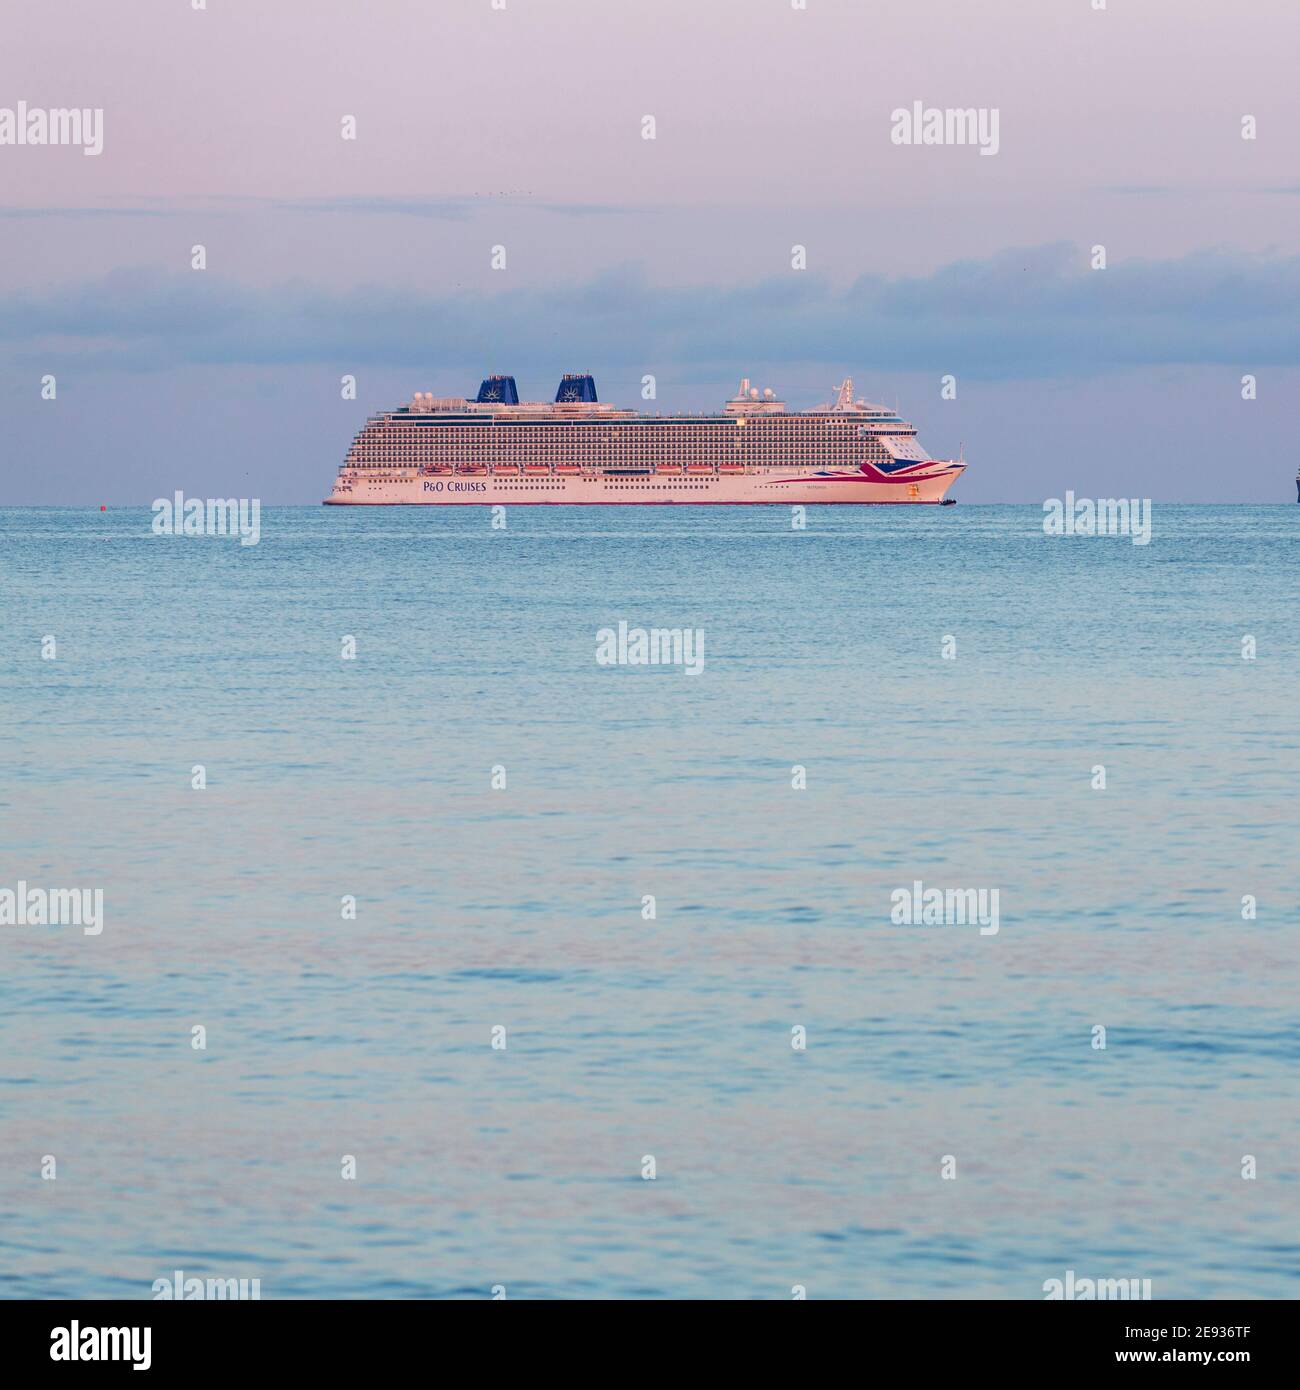 P&O Cruises' largest ship, Britannia, at anchor in Weymouth Bay. The cruise industry has suffered a complete shutdown during the covid-19 pandemic. Pi Stock Photo